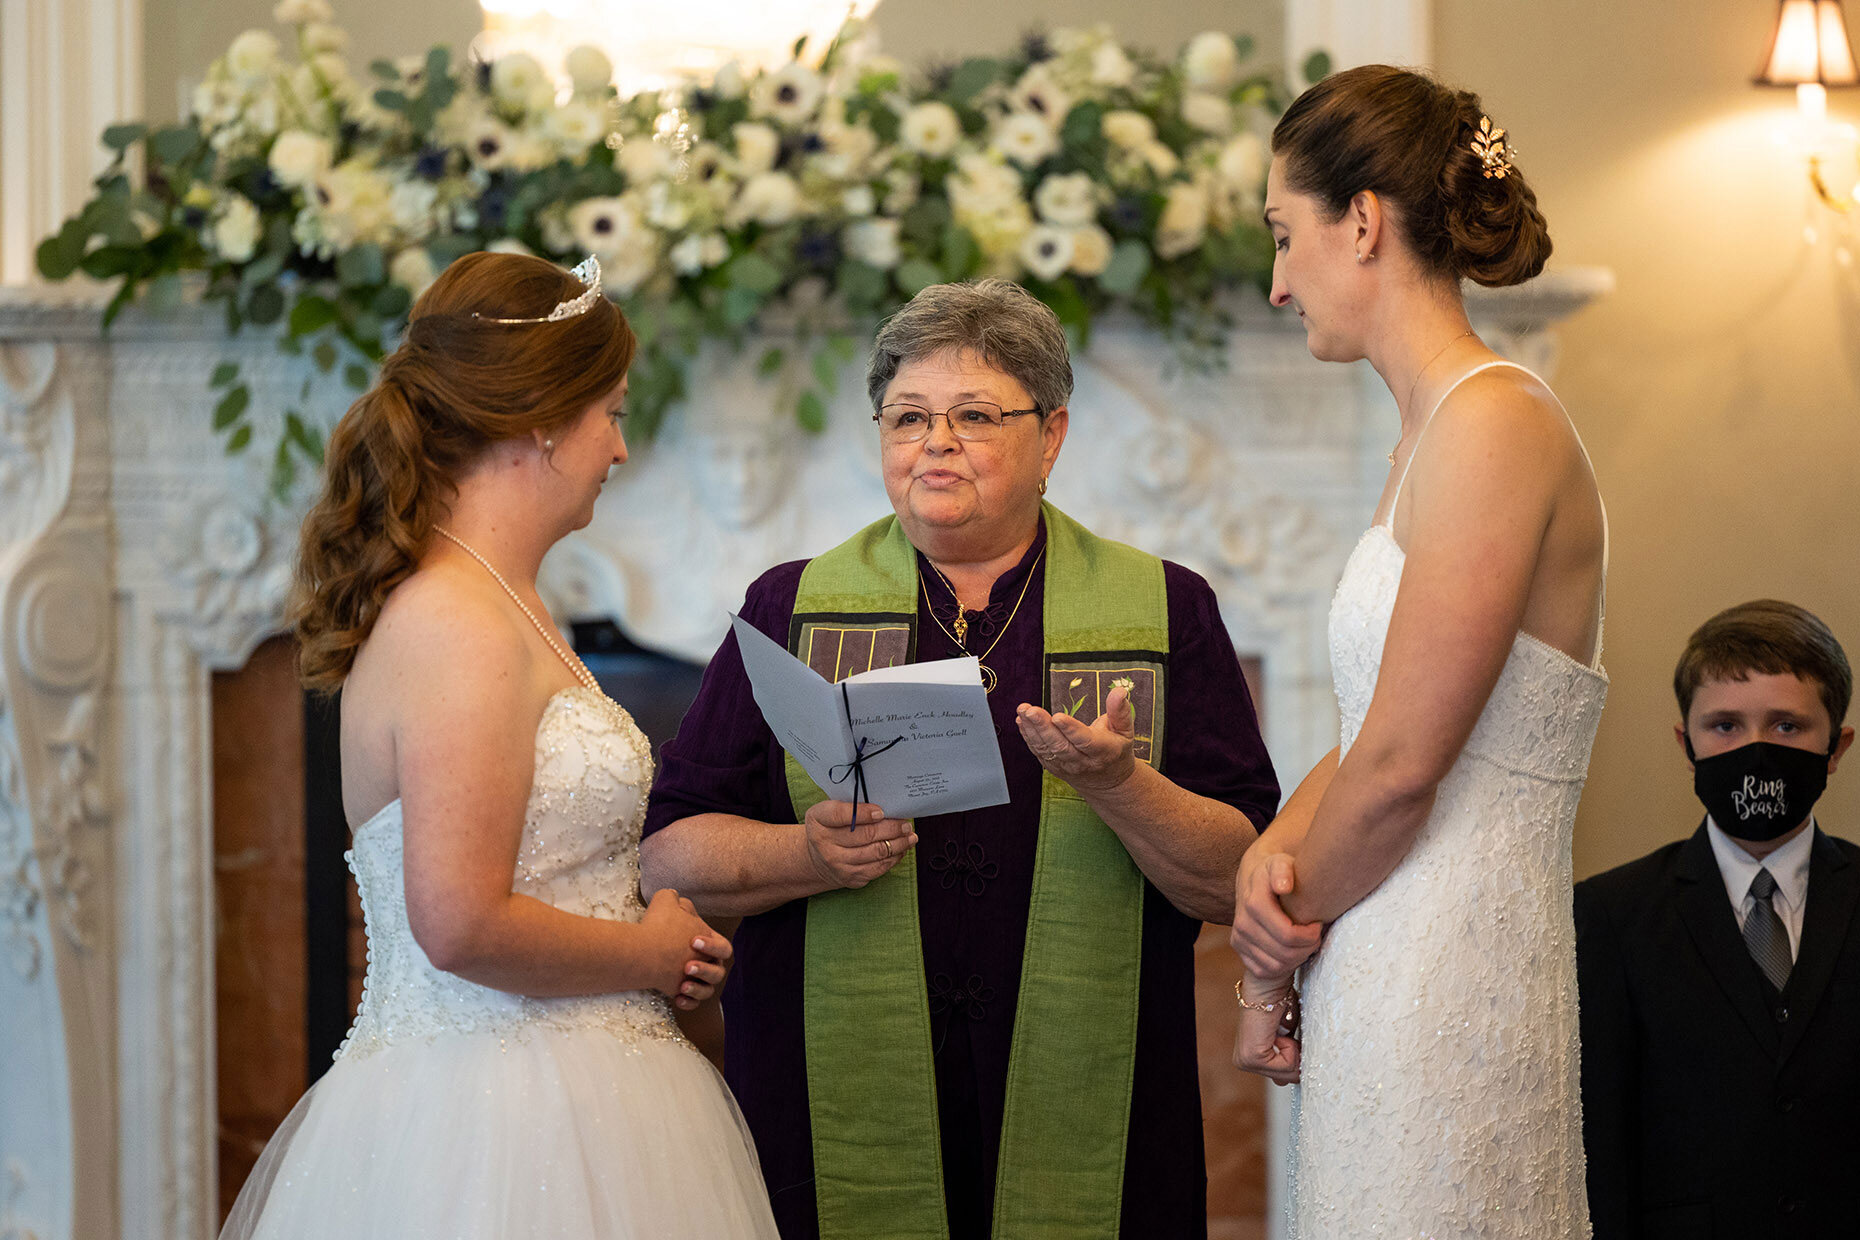 Exchanging Rings at Ceremony